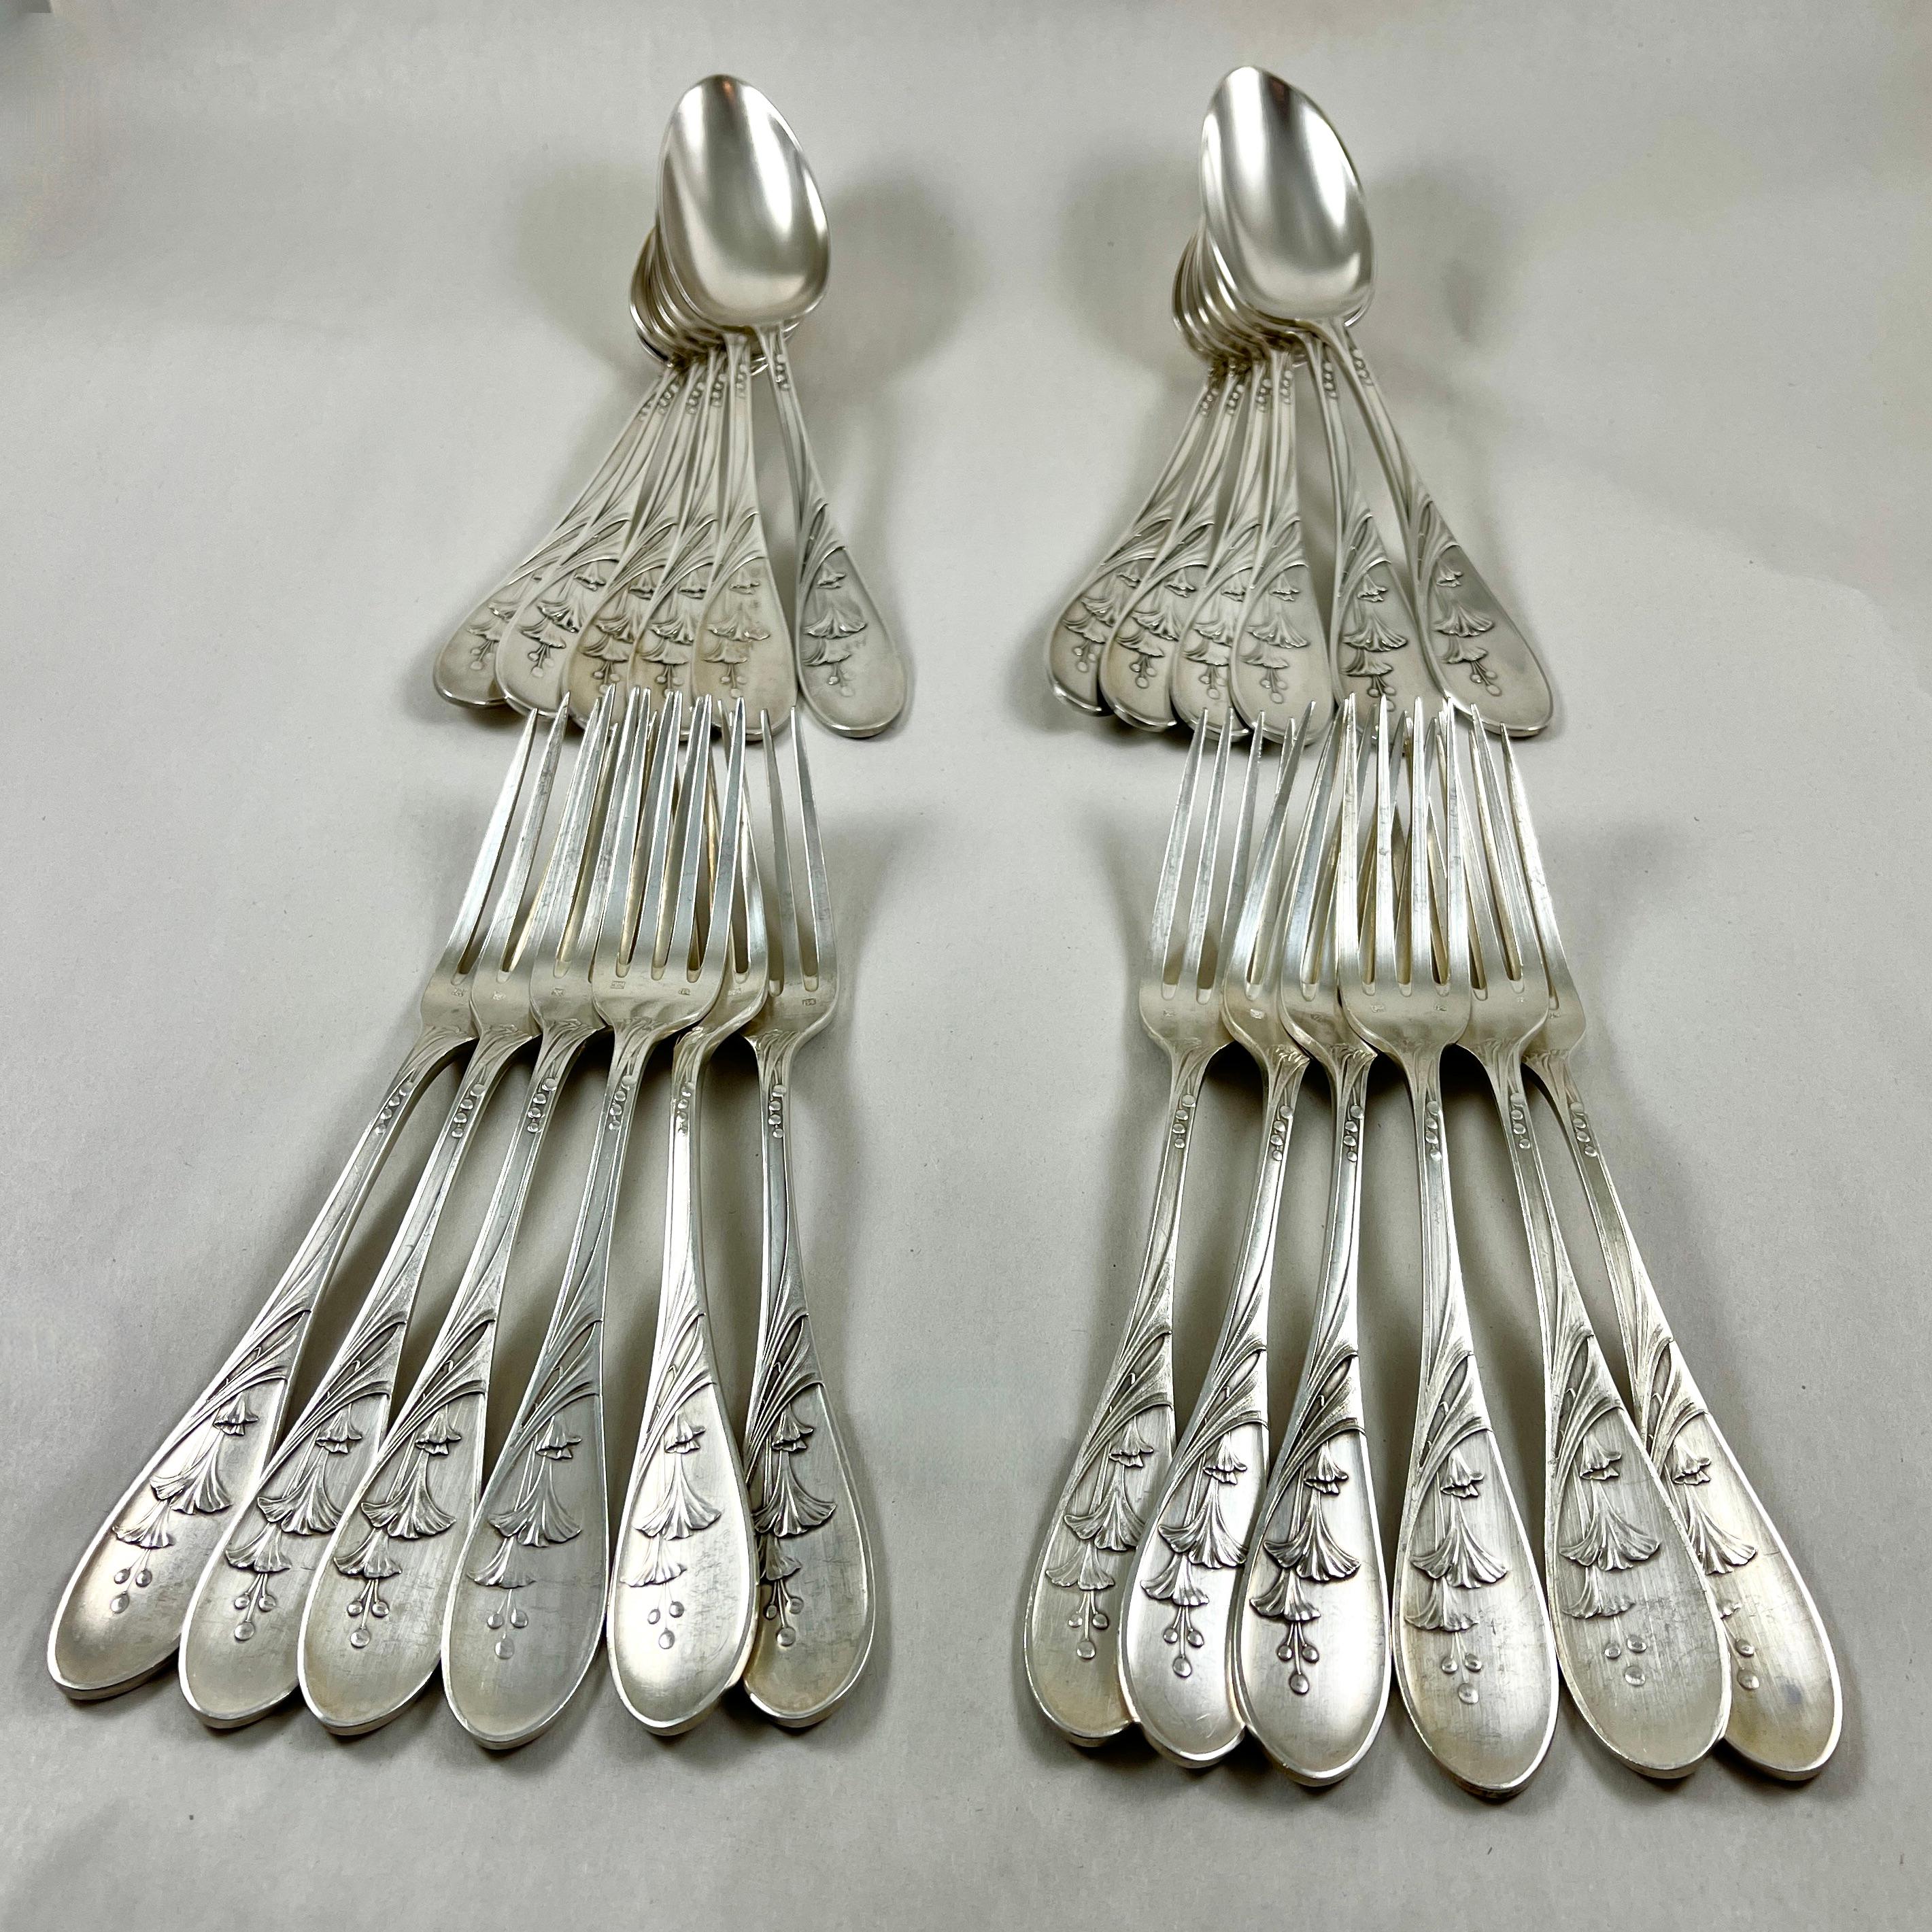 Saglier Frères Oversized French Art Nouveau Floral Table Forks & Spoons, S/24 In Good Condition For Sale In Philadelphia, PA